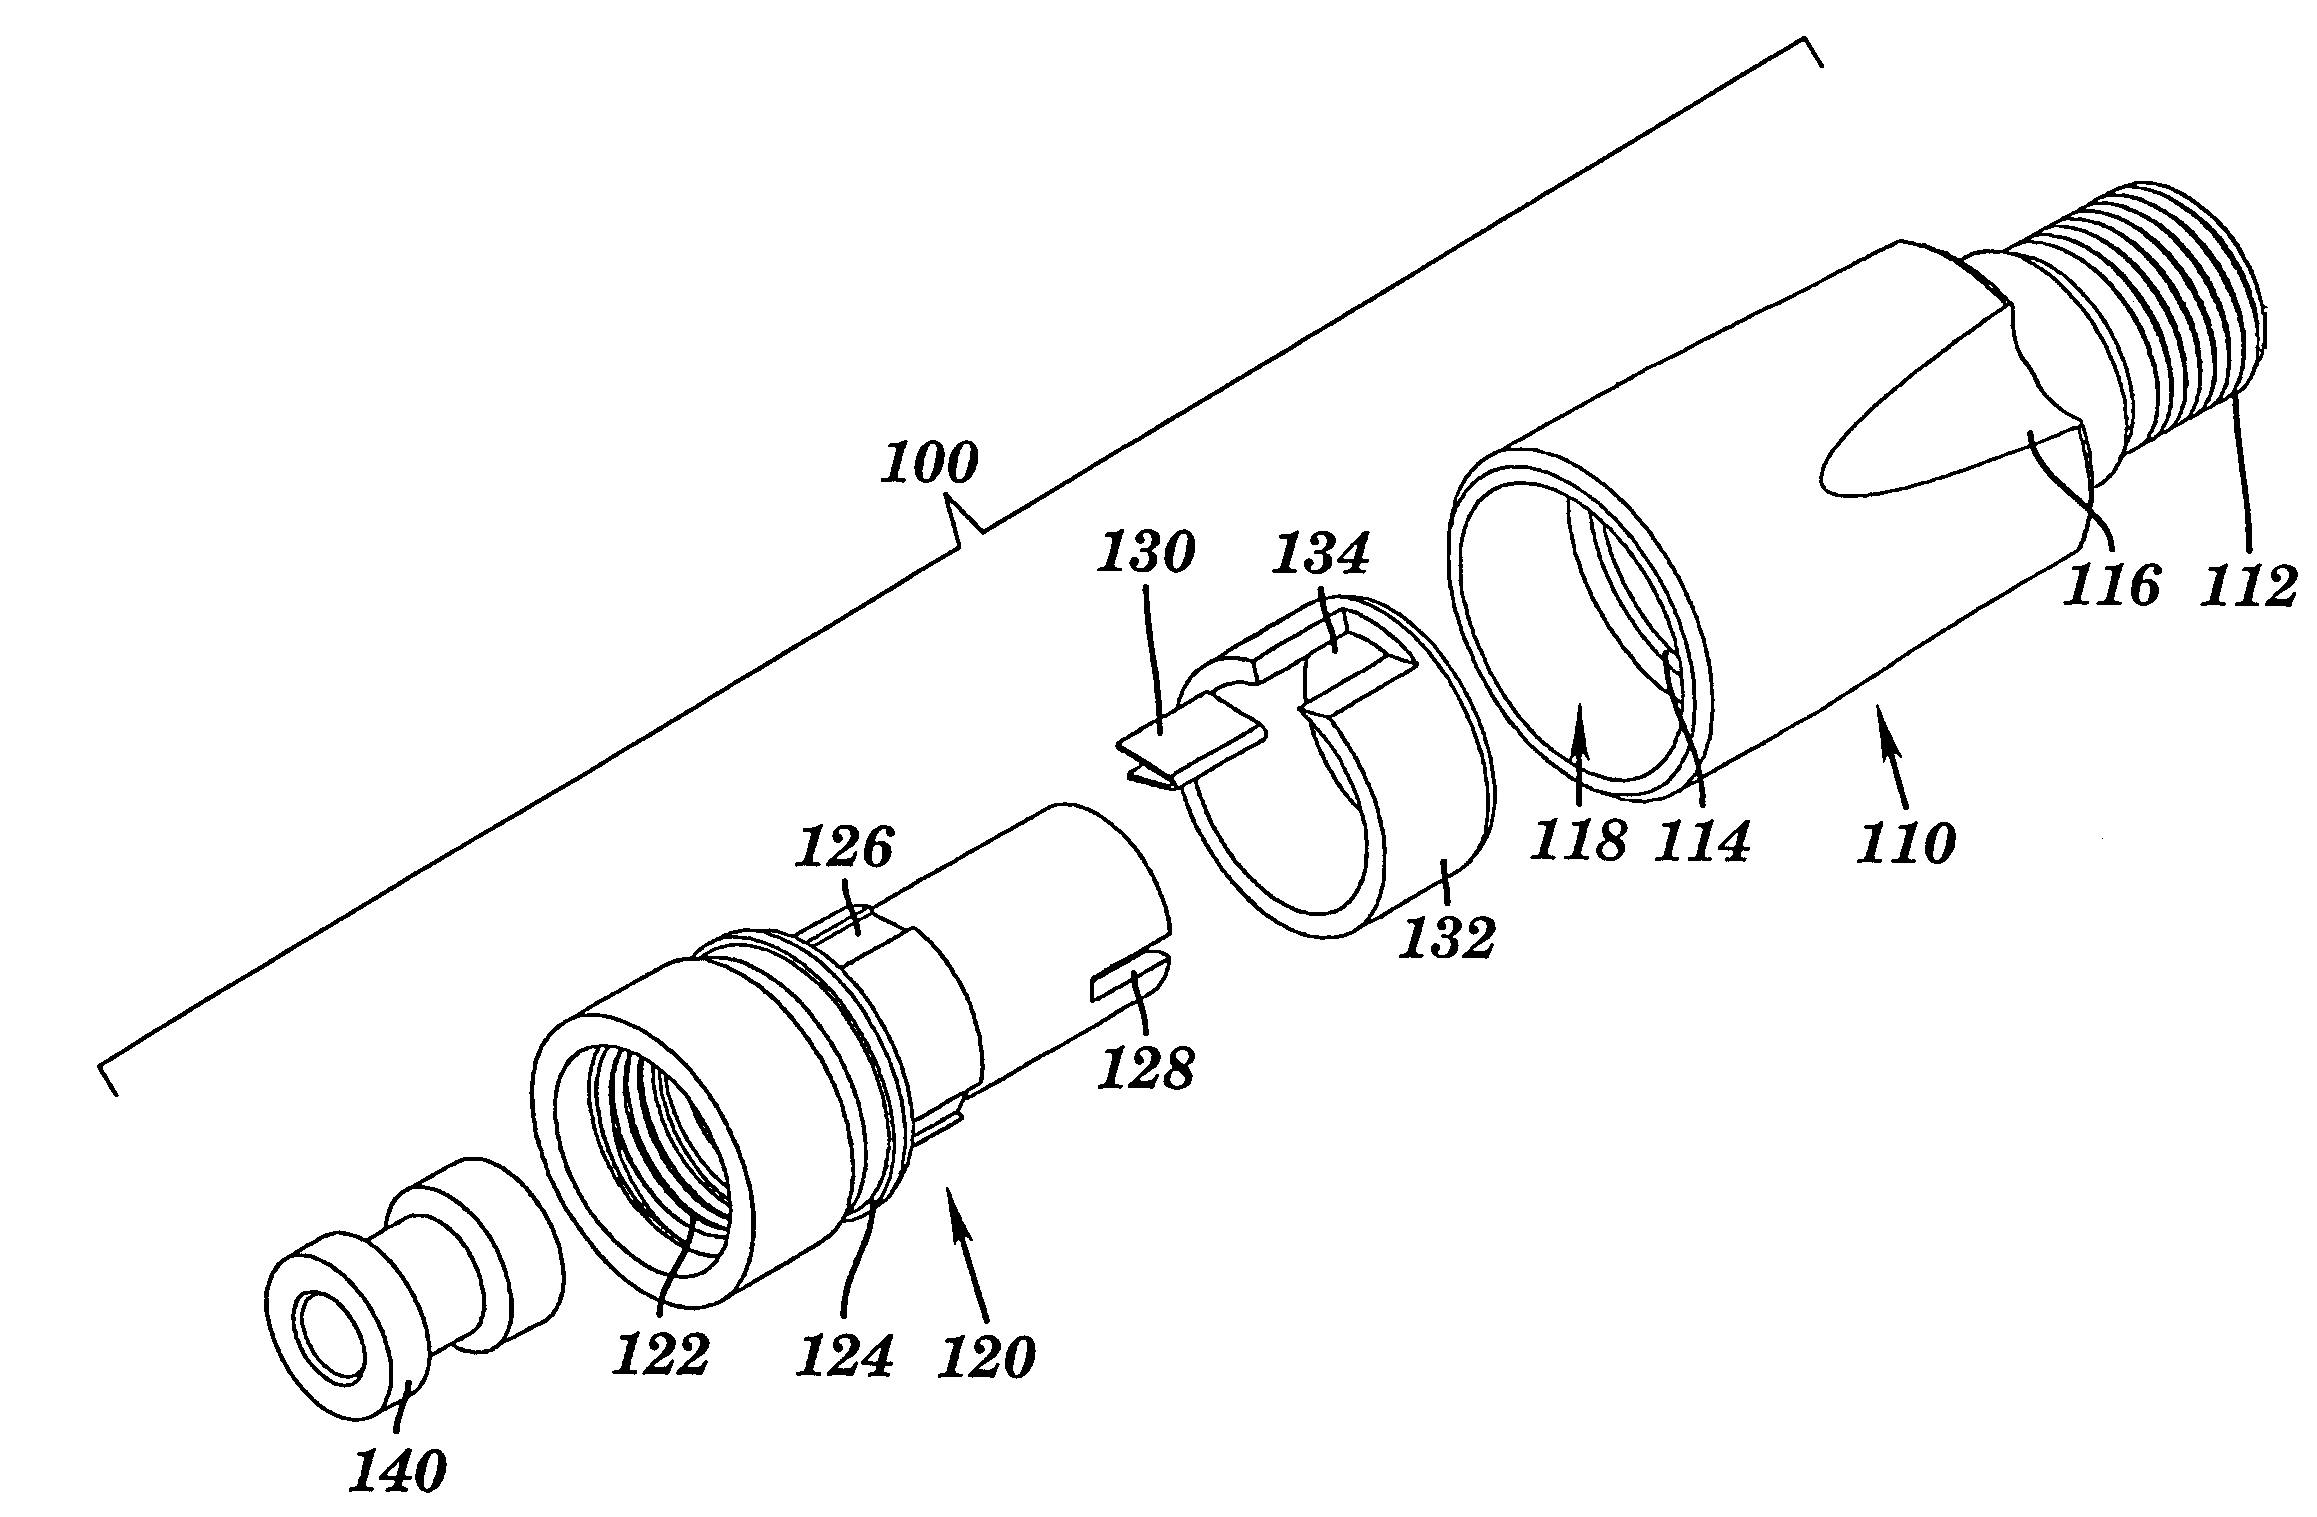 Coaxial cable port security device and method of use thereof